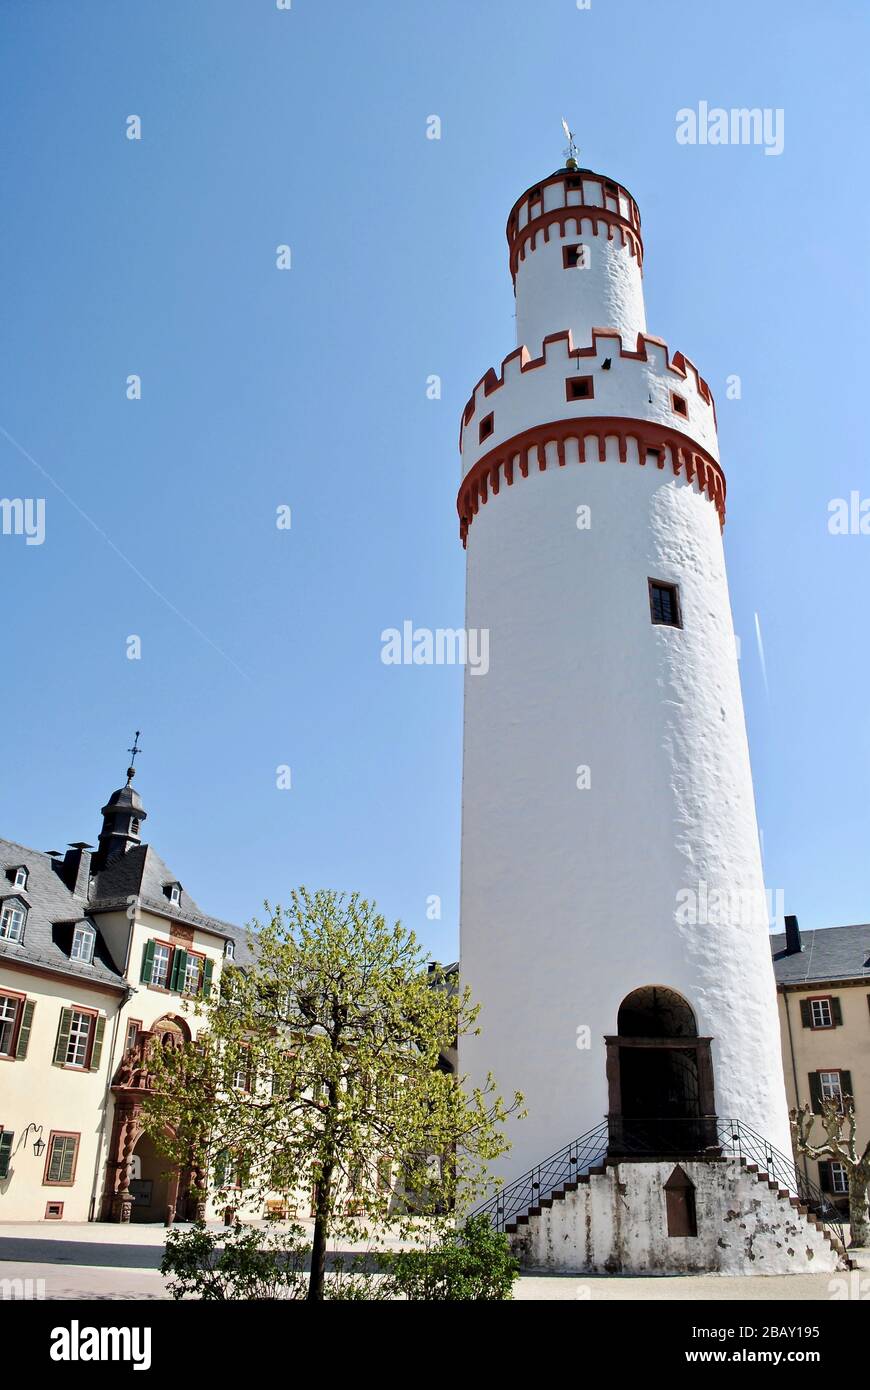 Bad Homburg Castle (Schloss Bad Homburg) is a castle and palace in the German city of Bad Homburg vor der Höhe, Germany. The White Tower (Weißer Turm) Stock Photo